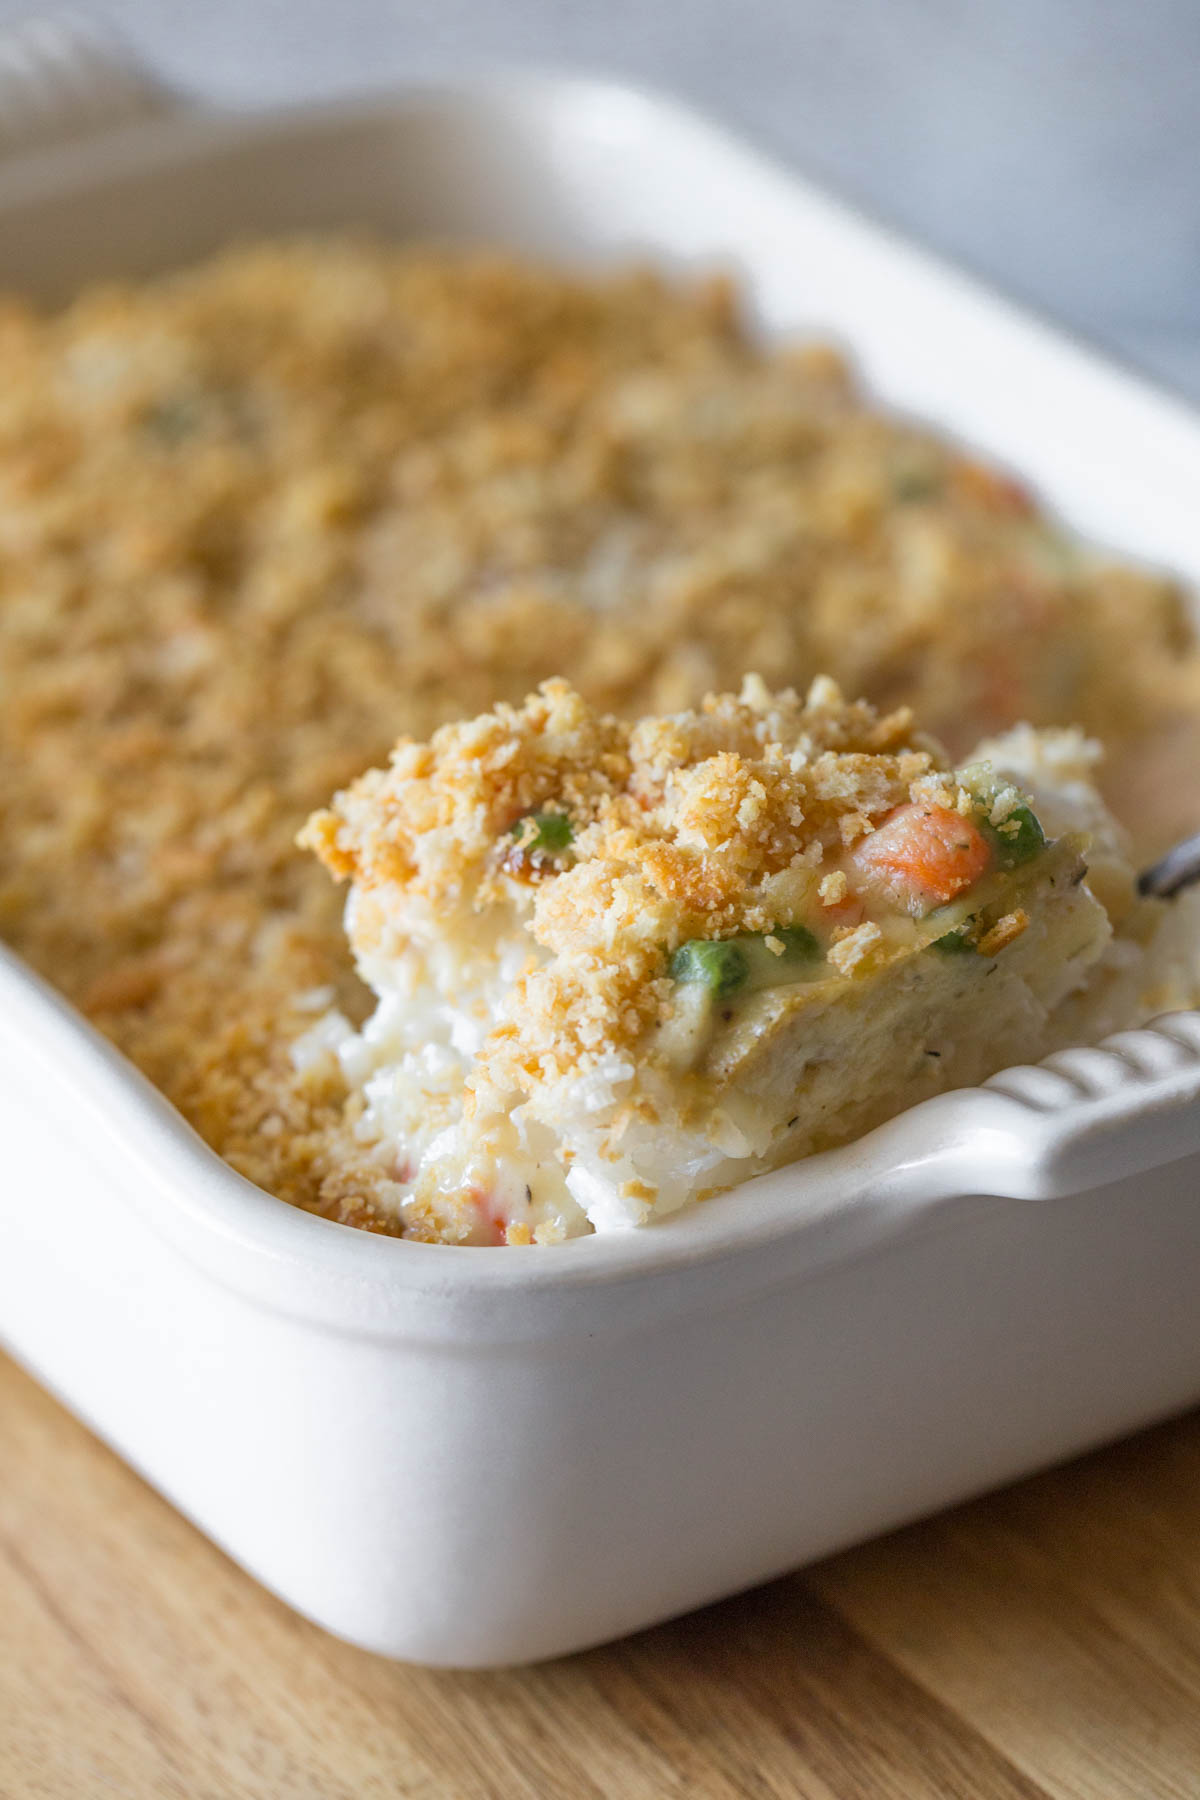 Close up view of Creamy Chicken and Rice Bake spooned out of the white casserole dish.  